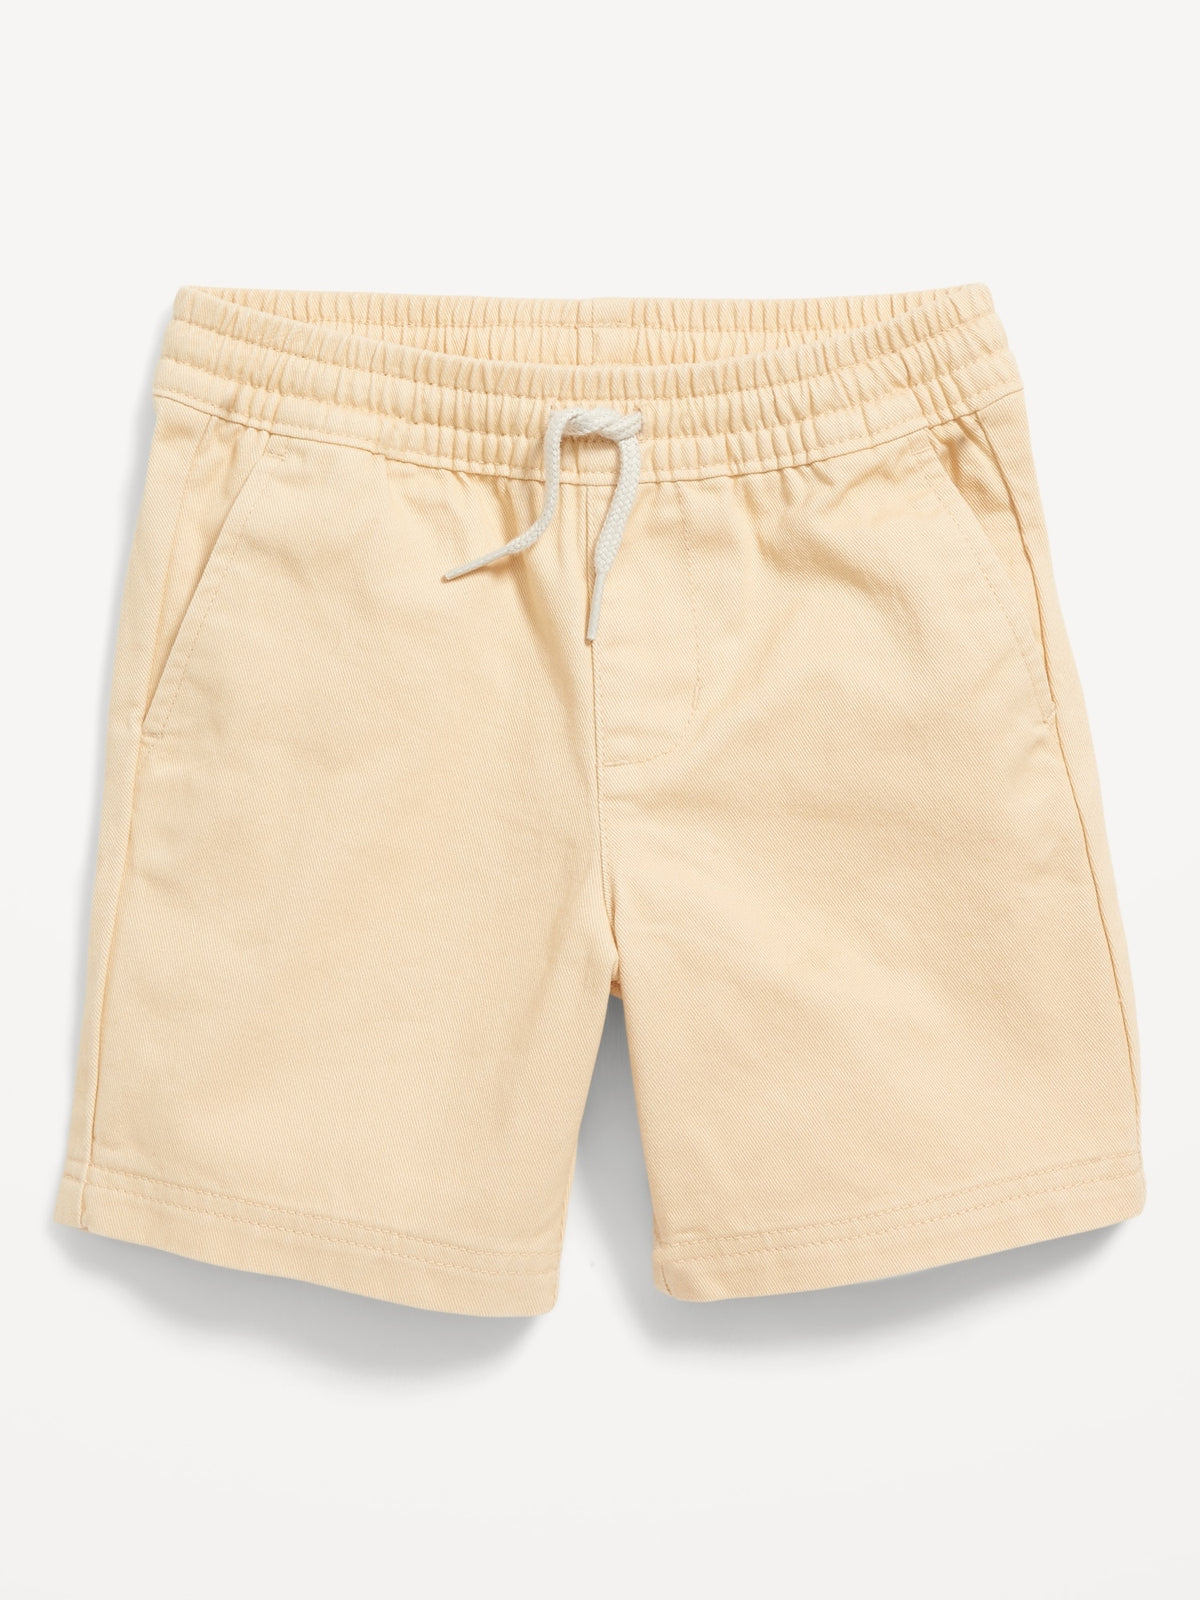 Functional-Drawstring Twill Shorts for Toddler Boys - Old Navy